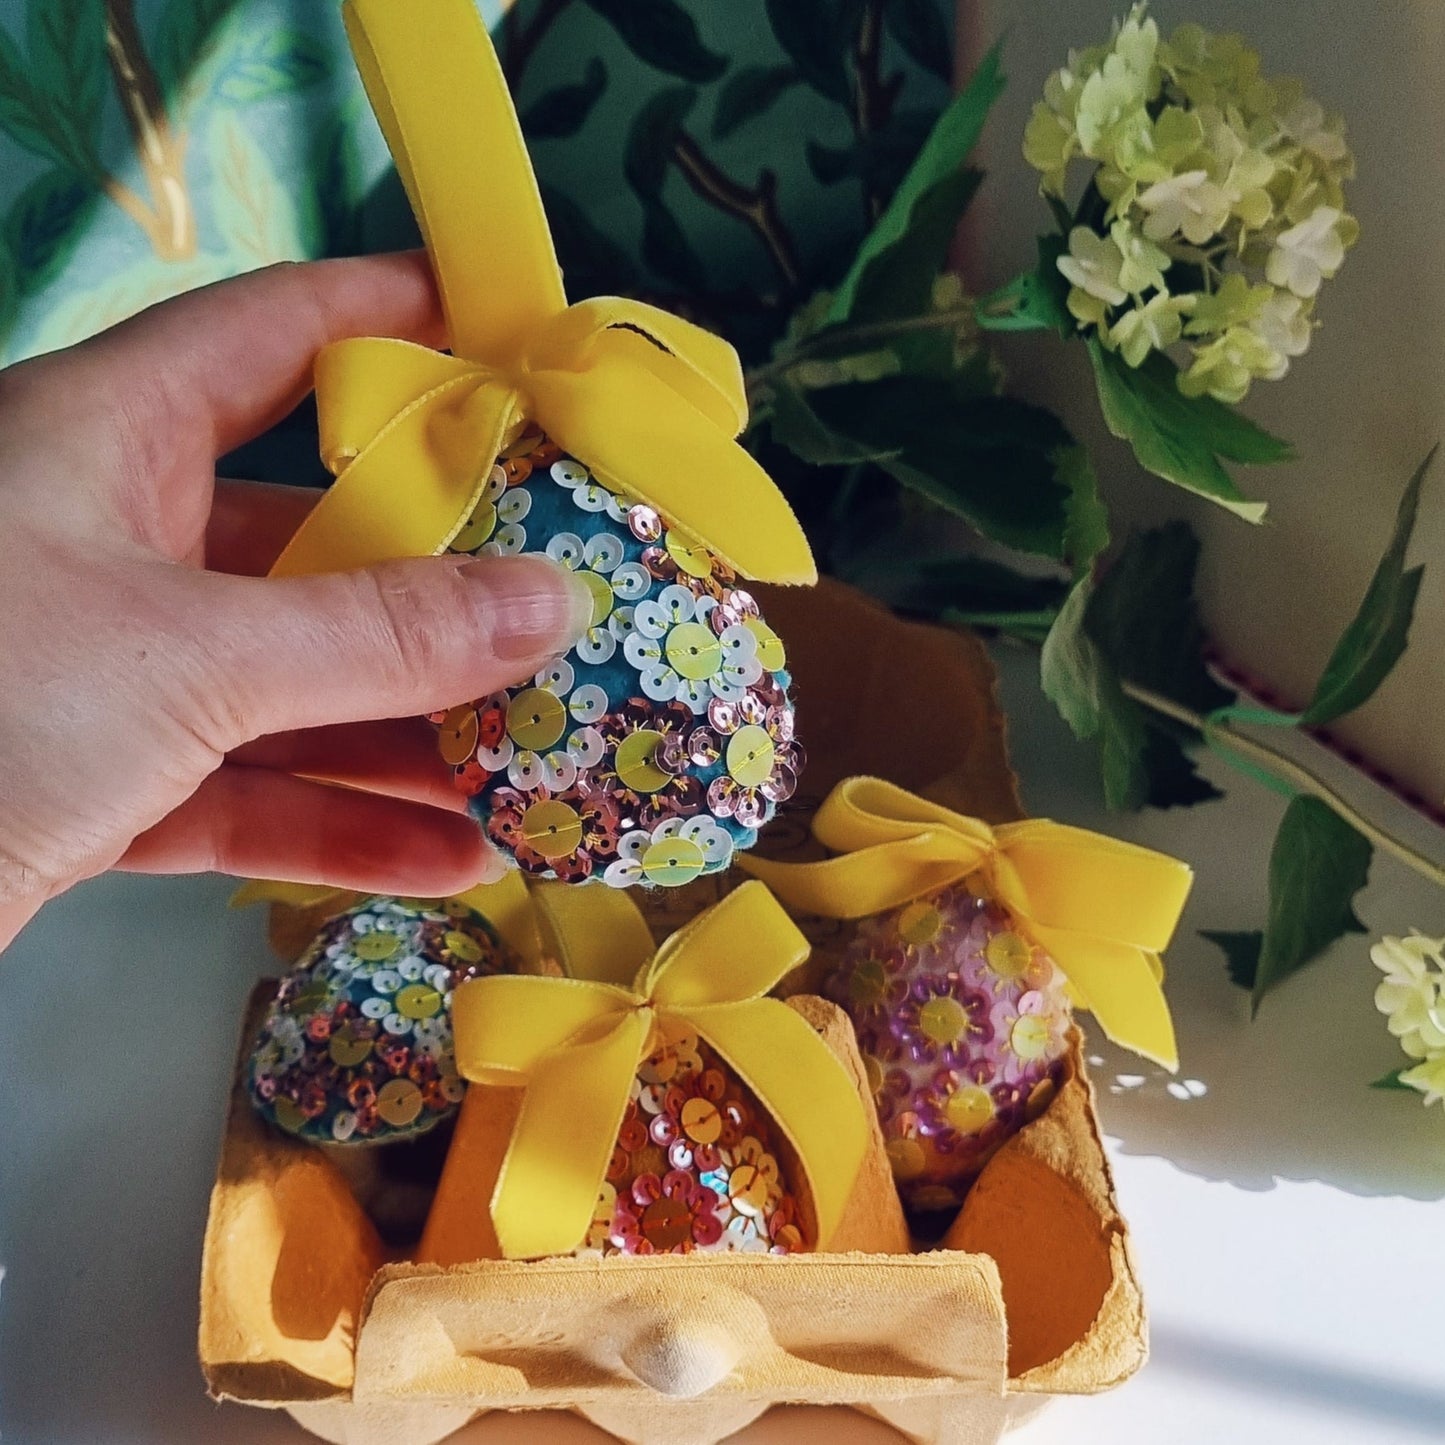 Kate's hand holding a blue sequin egg above a box of sequin eggs